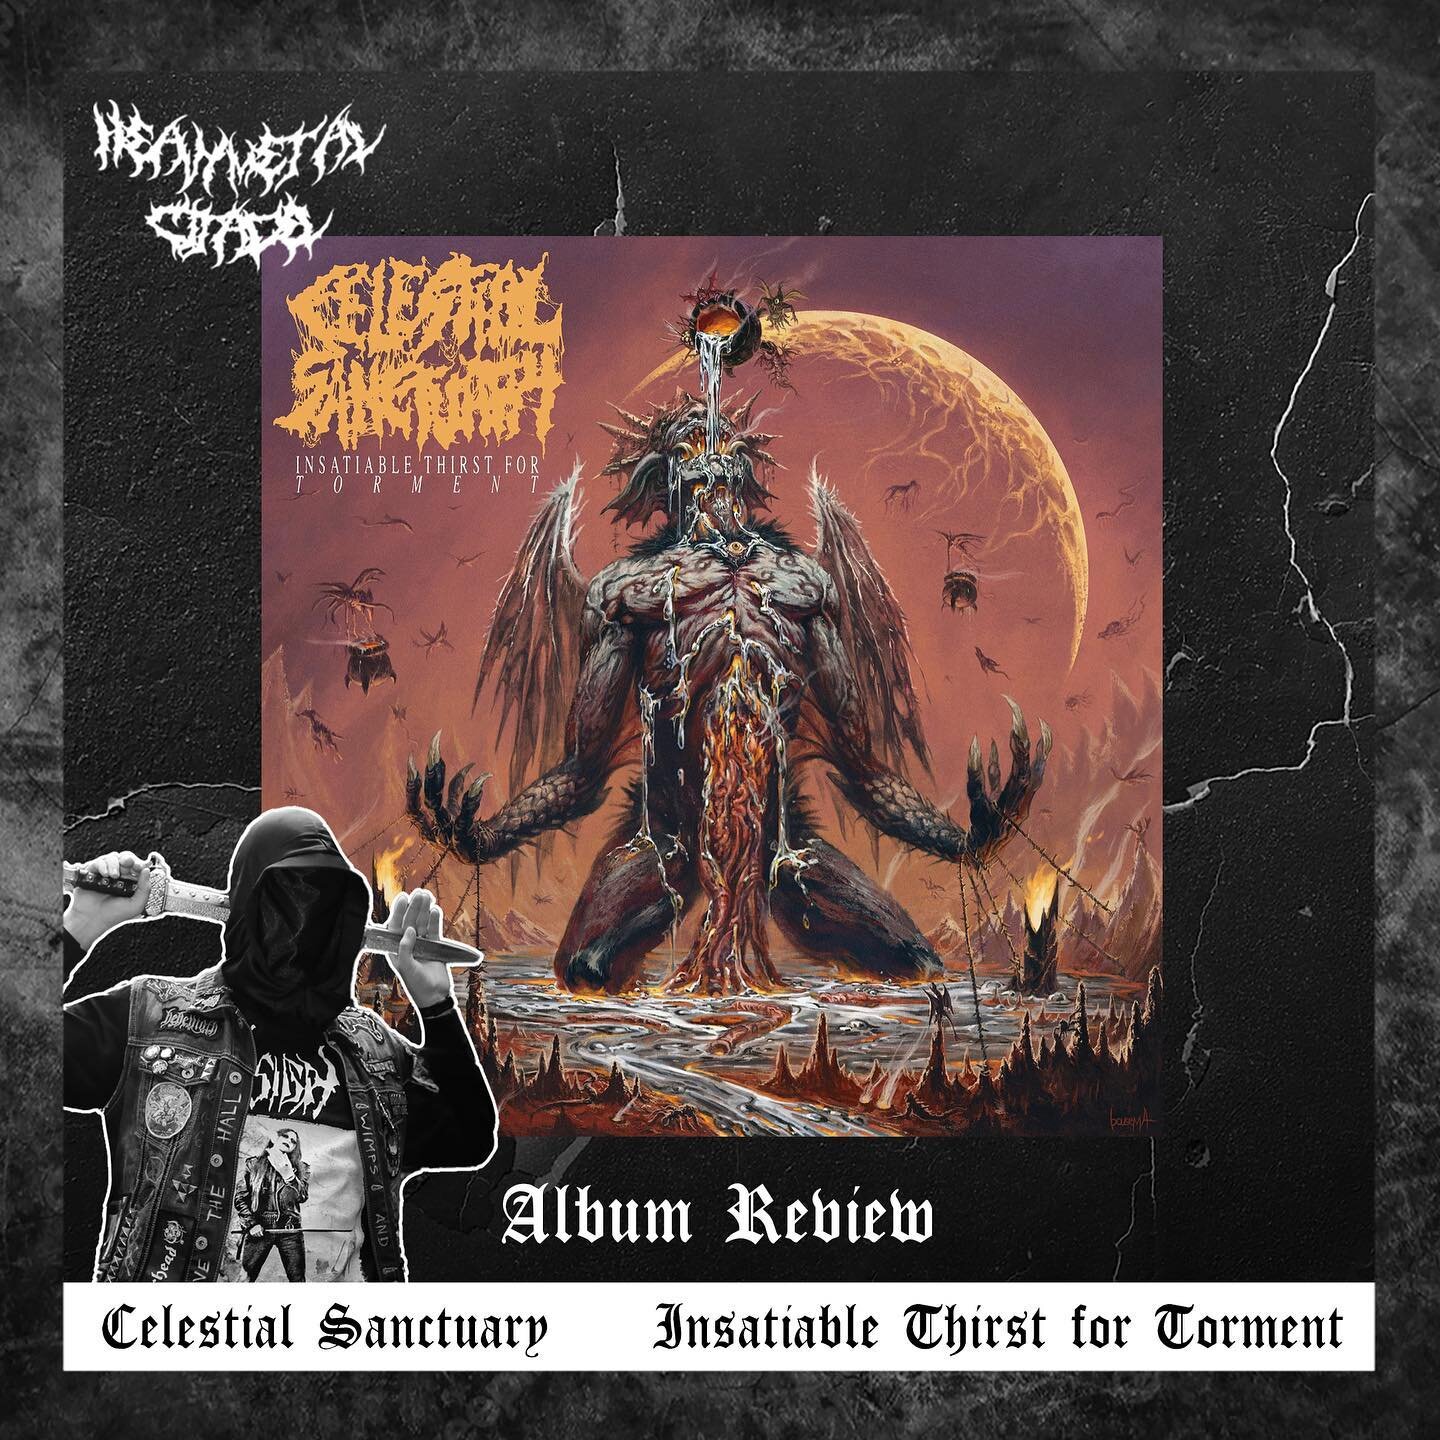 🔥NEW ALBUM REVIEW featuring @celestialsanctuarydeathmetal 🔥
Dive into the ear shattering depths of Death Metal mayhem with Celestial Sanctuary's latest album: &quot;Insatiable Thirst For Torment&quot;. More intense, more grotesque, and titles that 